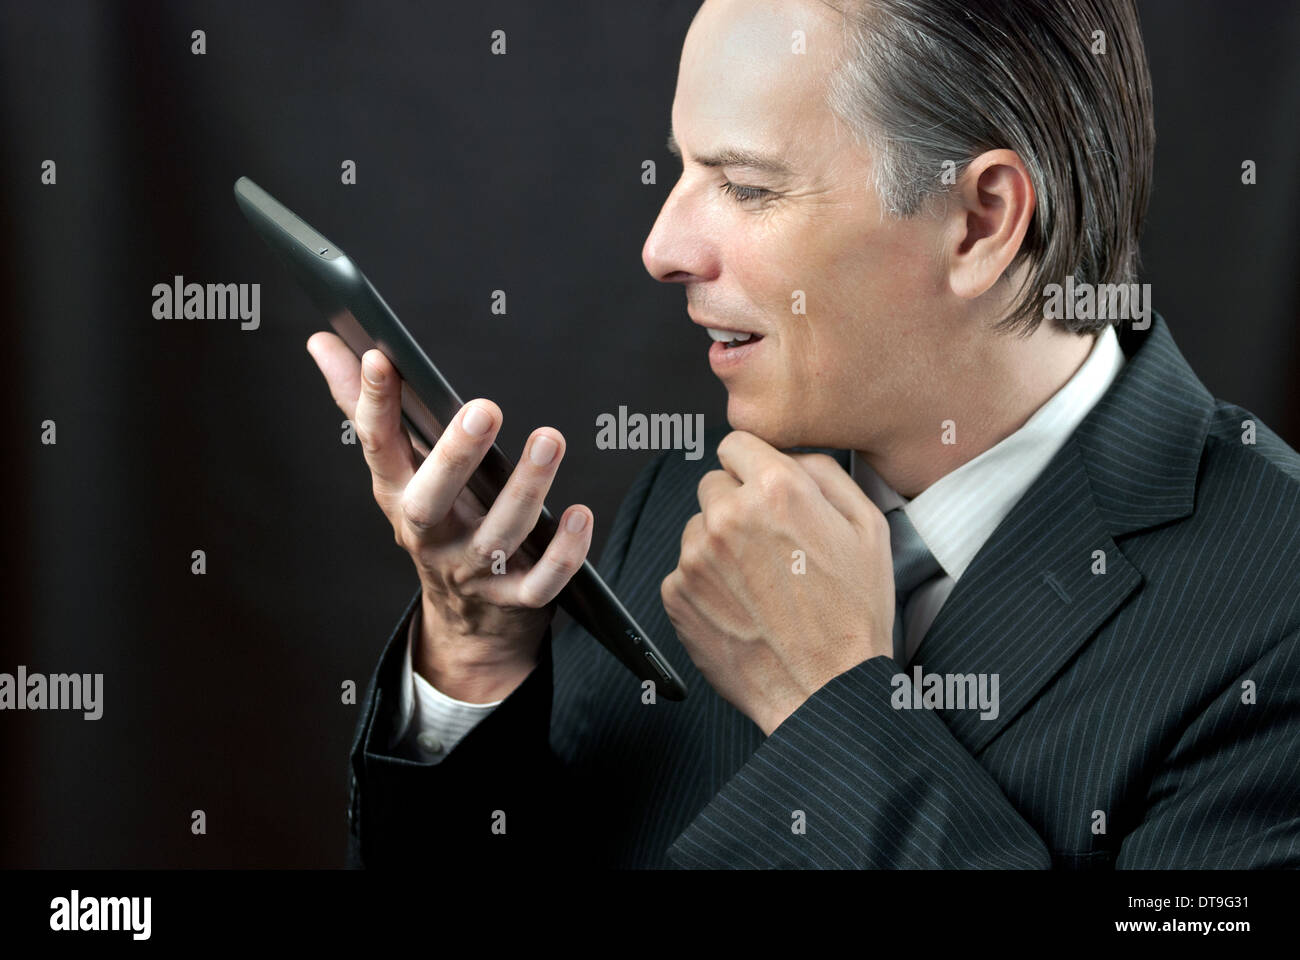 Close-up of a businessman admiring his tablet. Stock Photo